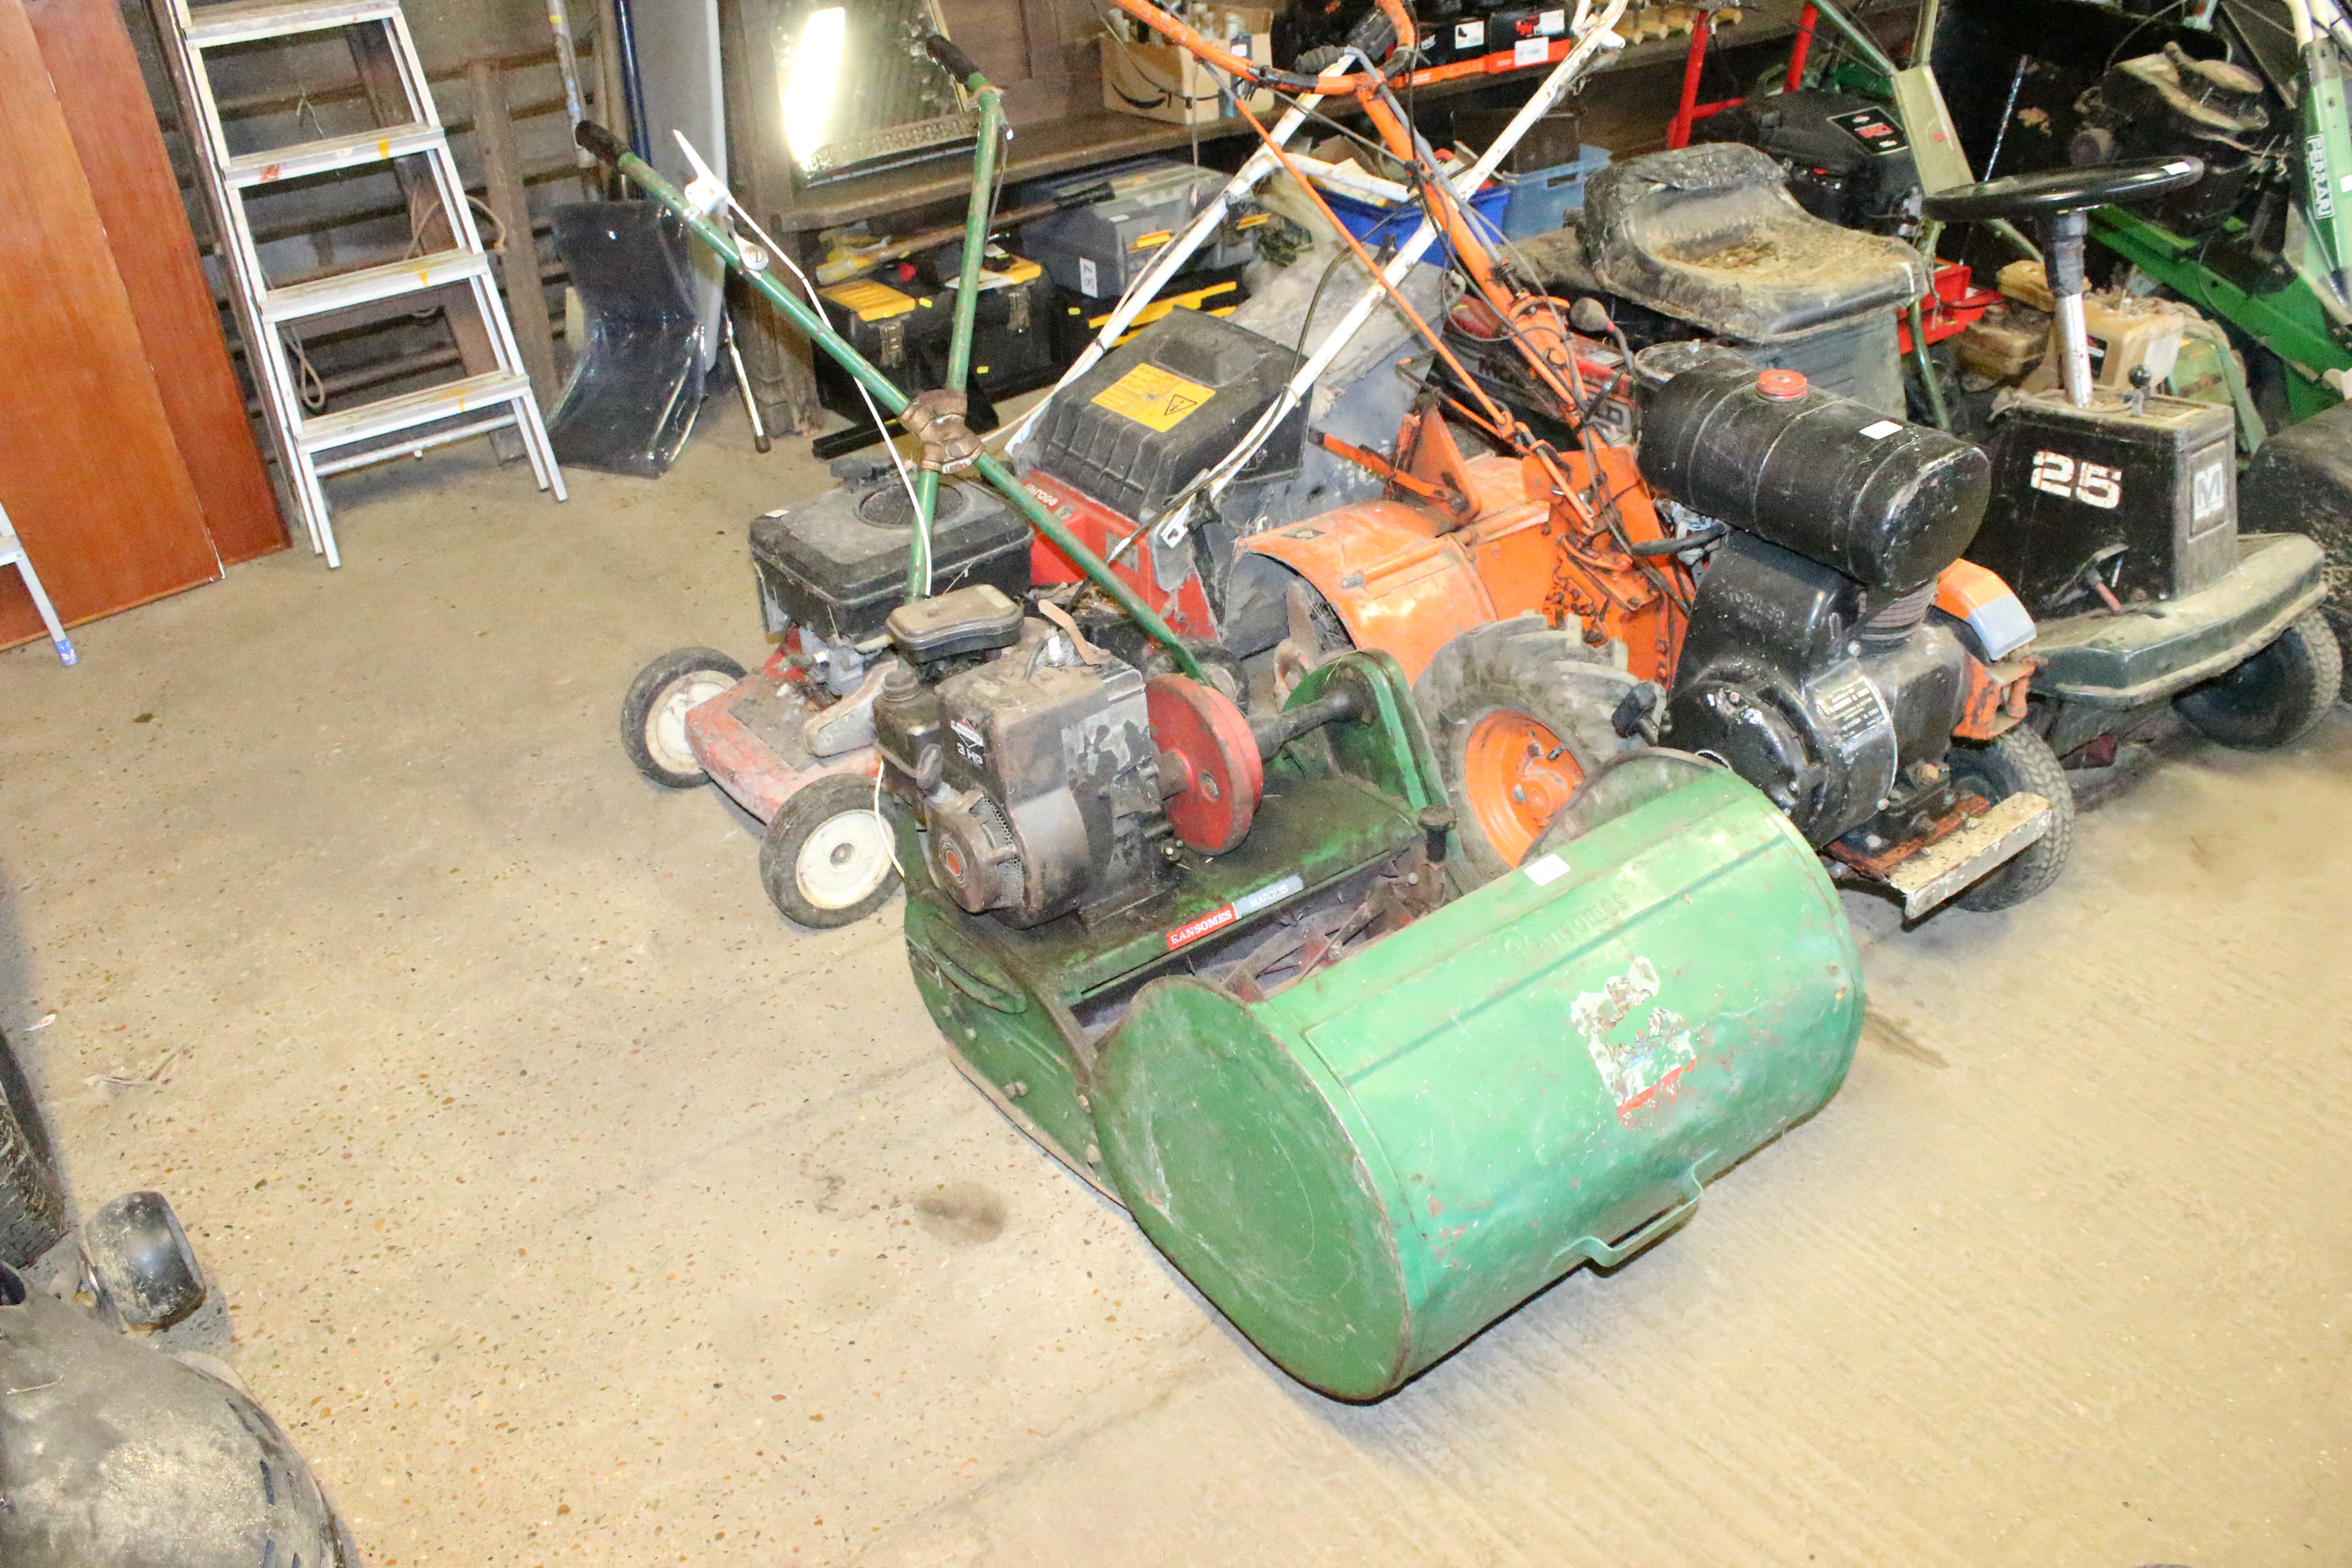 A Ransom's Marqueé 18" mower complete with grass b